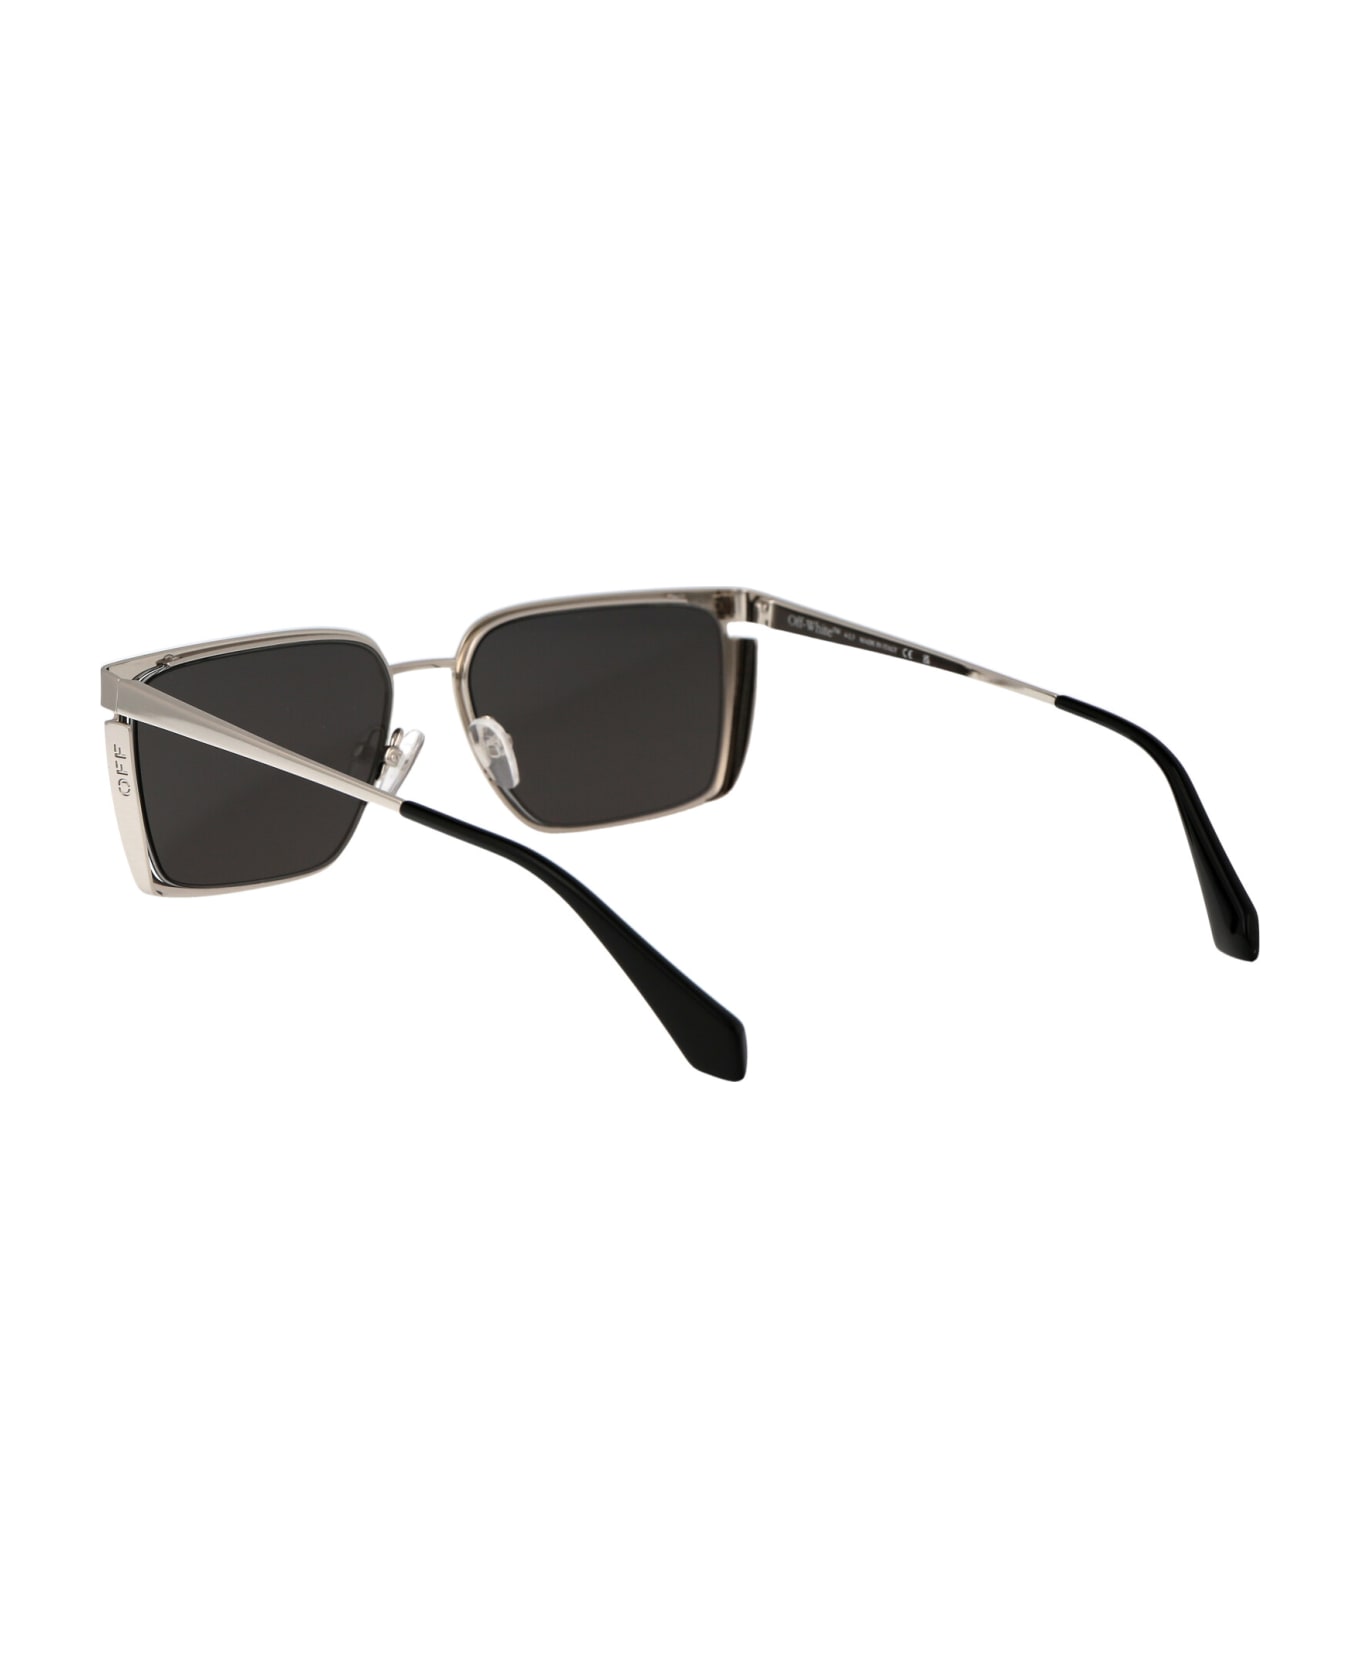 Off-White Yoder Sunglasses - 7207 SILVER